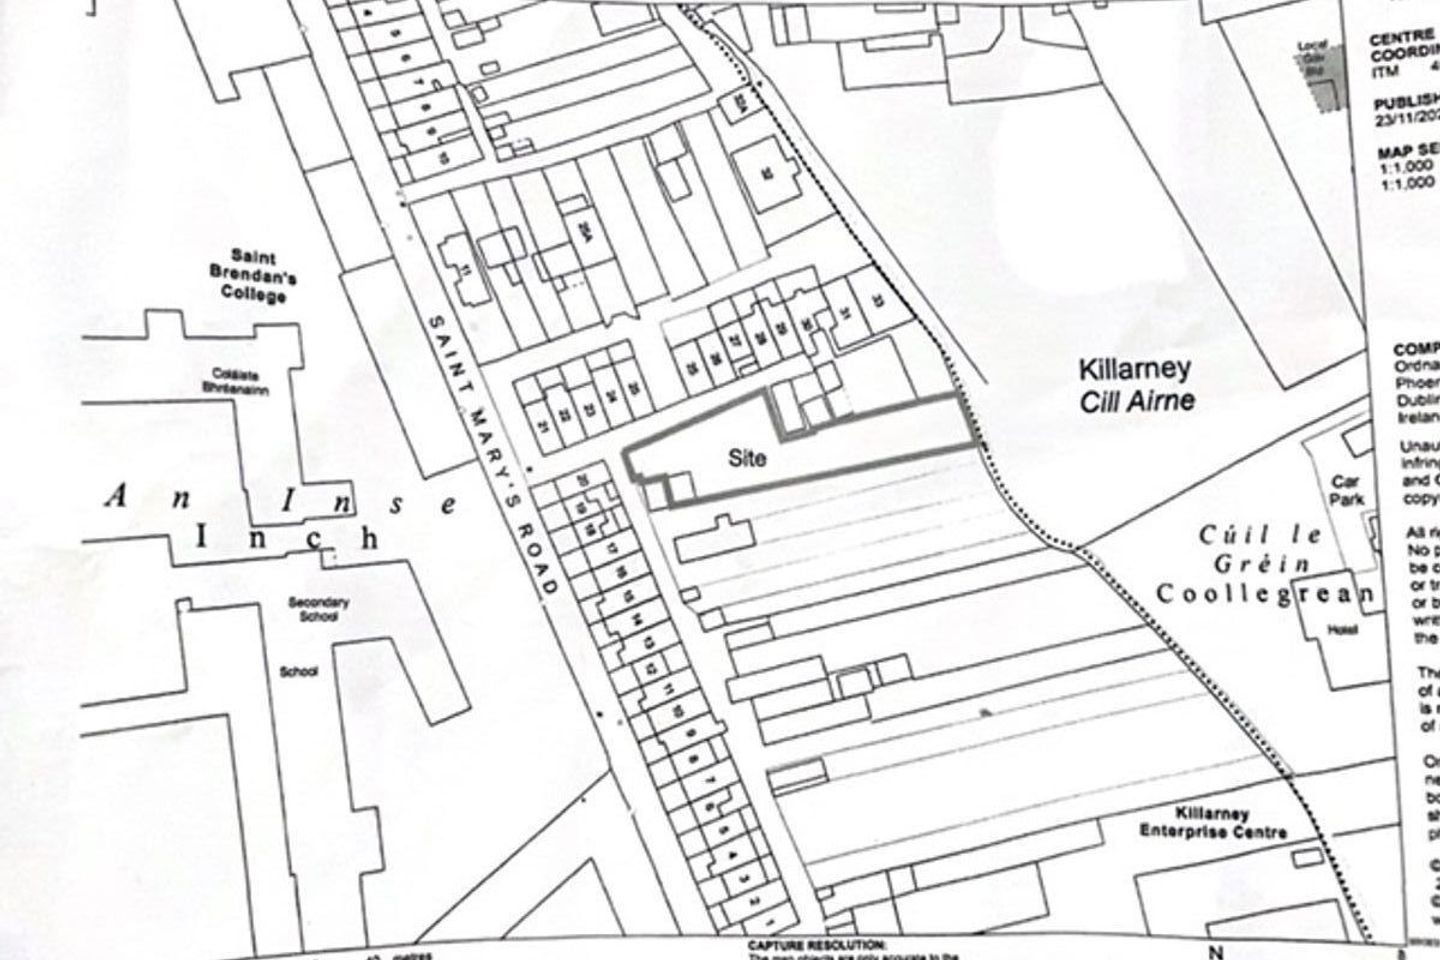 Site 0.179 acres at St Mary's Terrace, Killarney, Co. Kerry